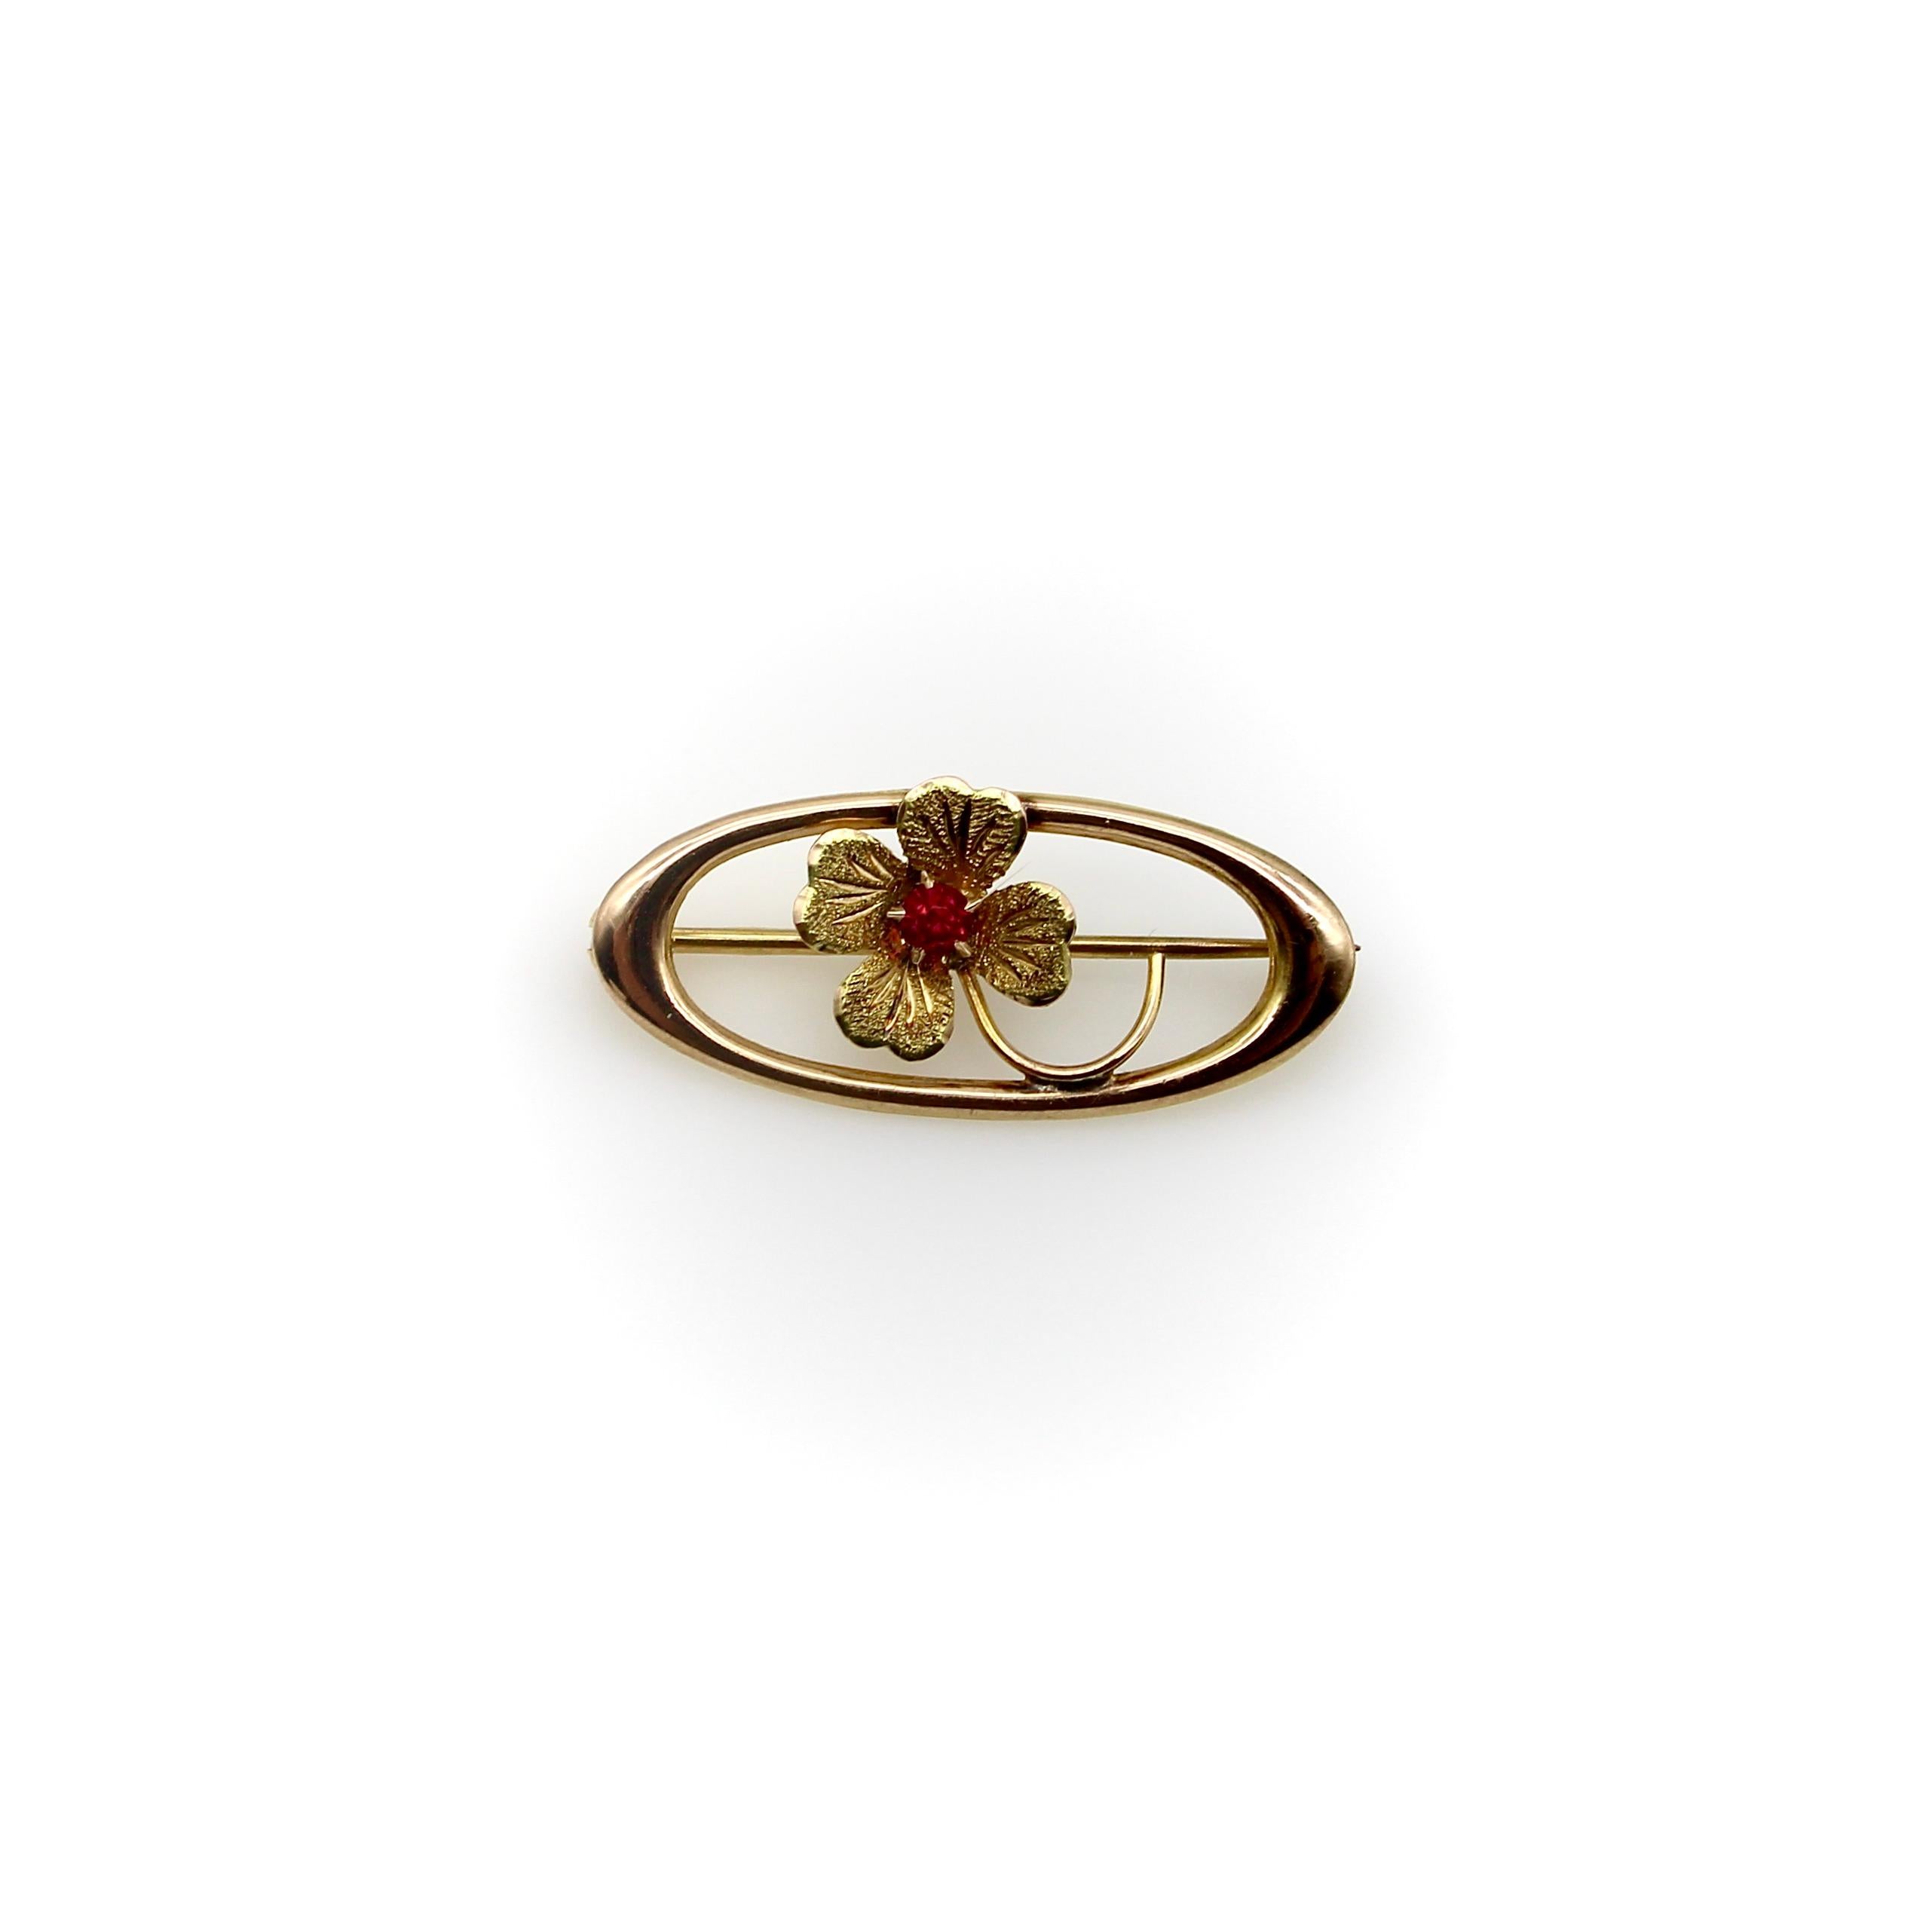 This adorable 10k gold pin brings a little good luck when worn on a jacket or blazer! Set in the center of an oval, a four-leaf clover is carved with lovely hand engraved details and topped with a red glass paste gemstone for a touch of color. 
The